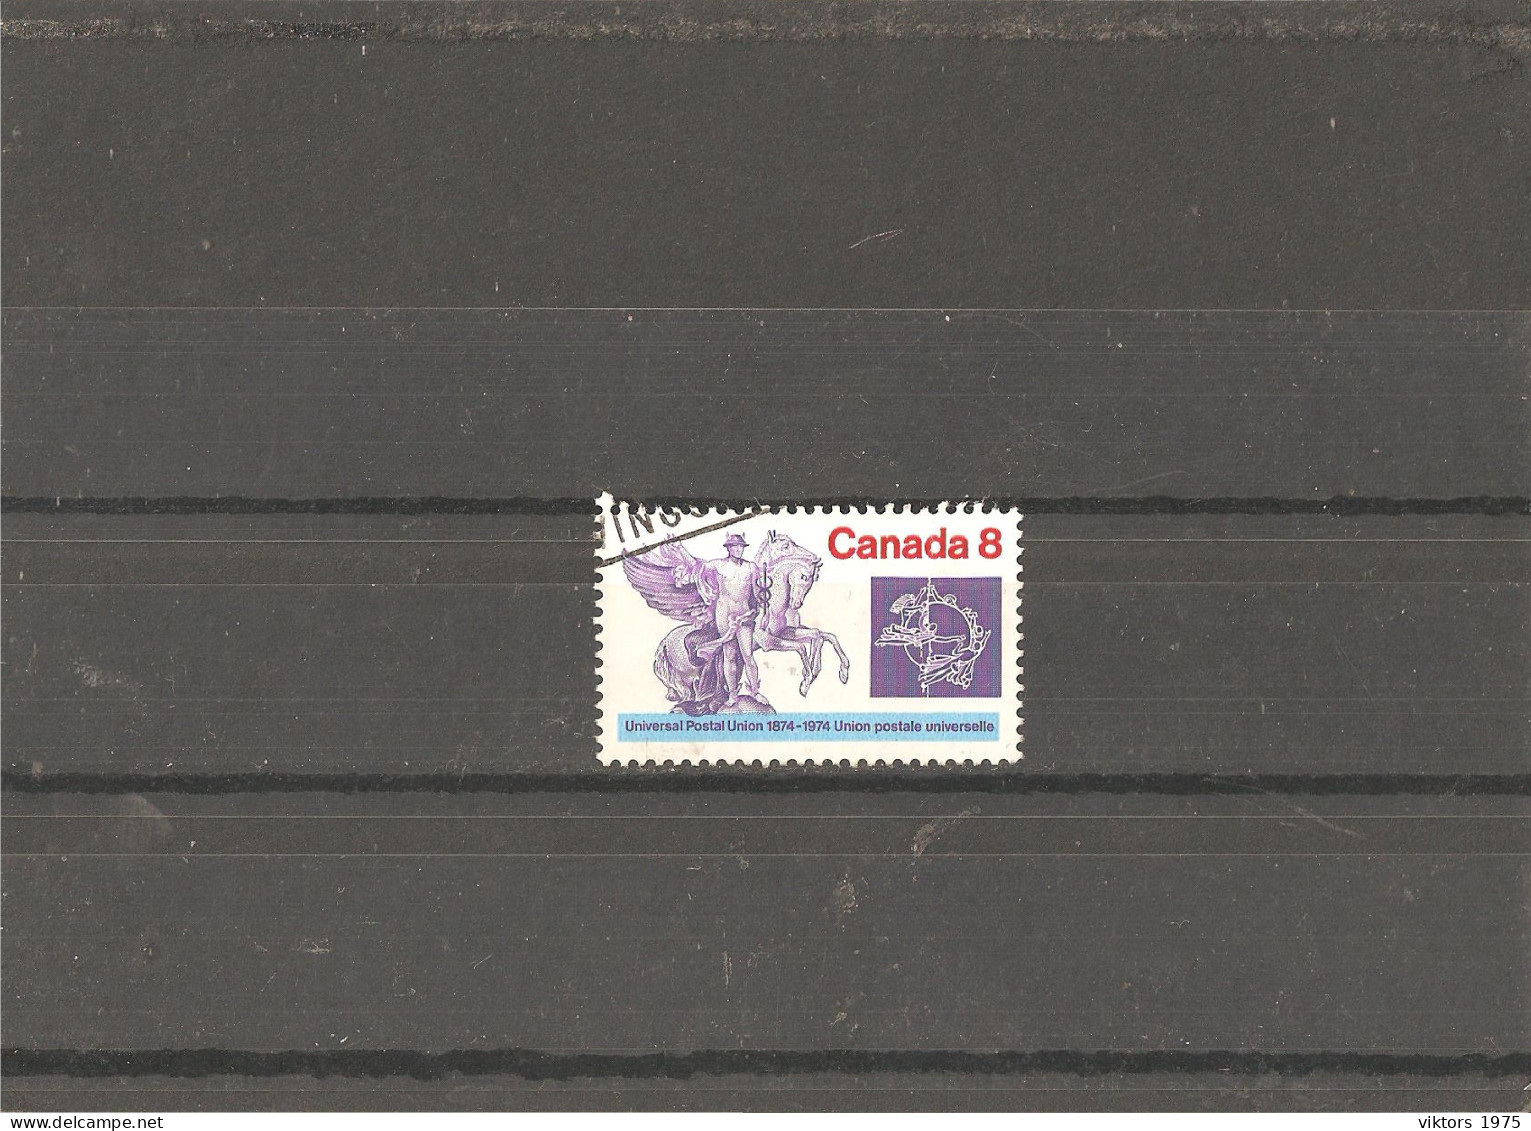 Used Stamp Nr.698 In Darnell Catalog - Oblitérés